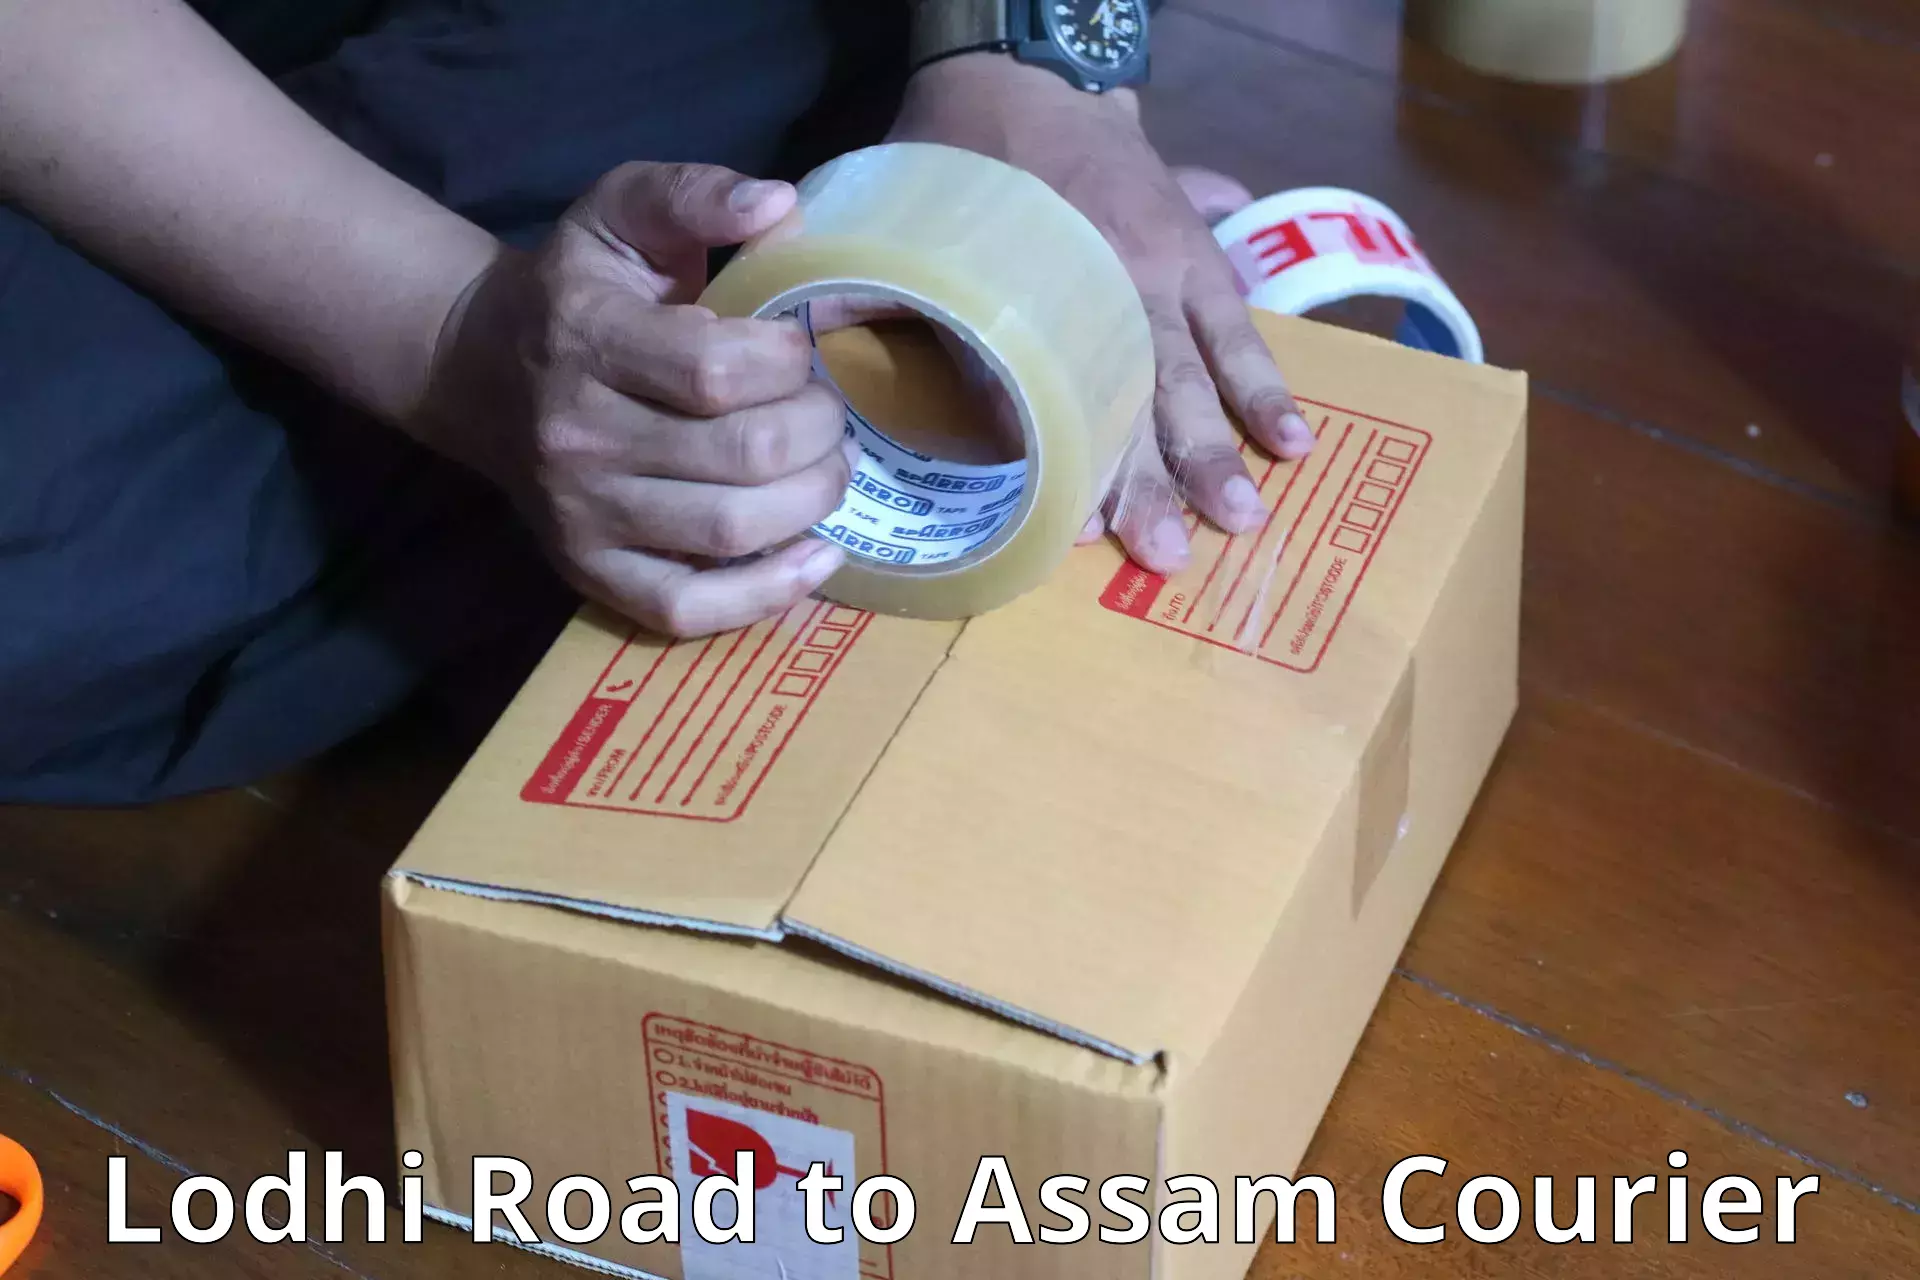 Luggage delivery system Lodhi Road to Assam